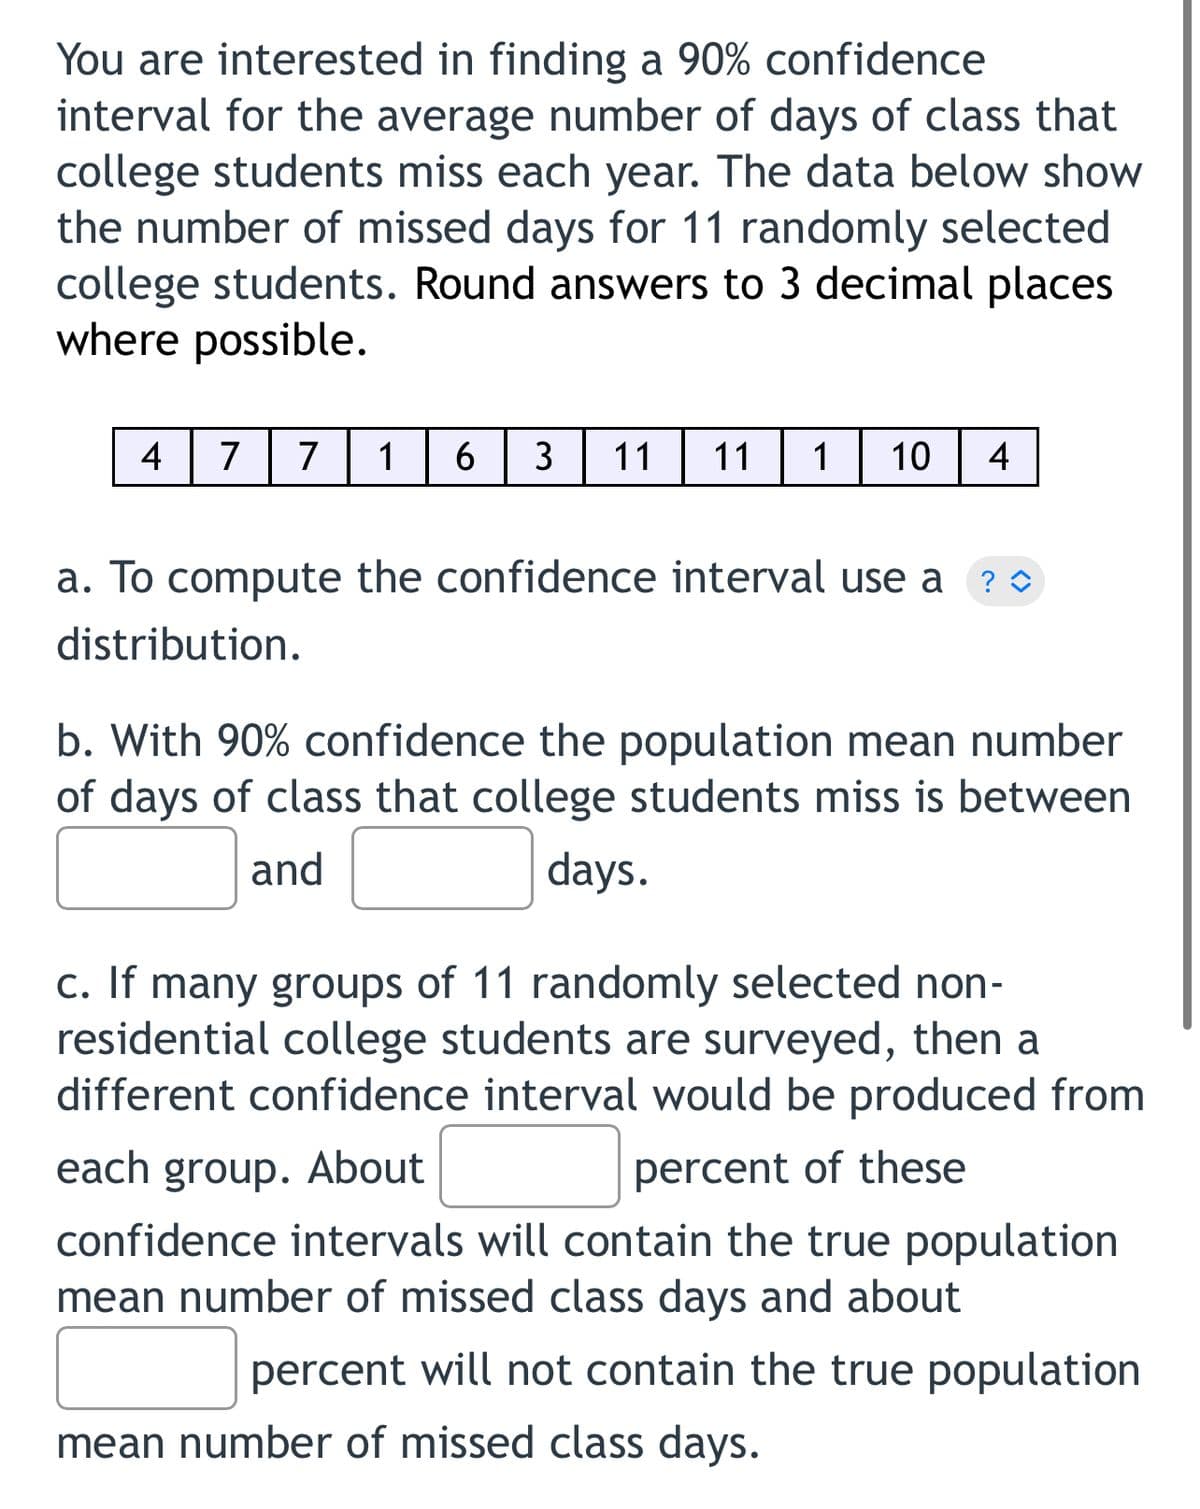 You are interested in finding a 90% confidence
interval for the average number of days of class that
college students miss each year. The data below show
the number of missed days for 11 randomly selected
college students. Round answers to 3 decimal places
where possible.
4
7
7
1
6
3
11
11
10
4
a. To compute the confidence interval use a ?0
distribution.
b. With 90% confidence the population mean number
of days of class that college students miss is between
and
days.
c. If many groups of 11 randomly selected non-
residential college students are surveyed, then a
different confidence interval would be produced from
each group. About
percent of these
confidence intervals will contain the true population
mean number of missed class days and about
percent will not contain the true population
mean number of missed class days.
